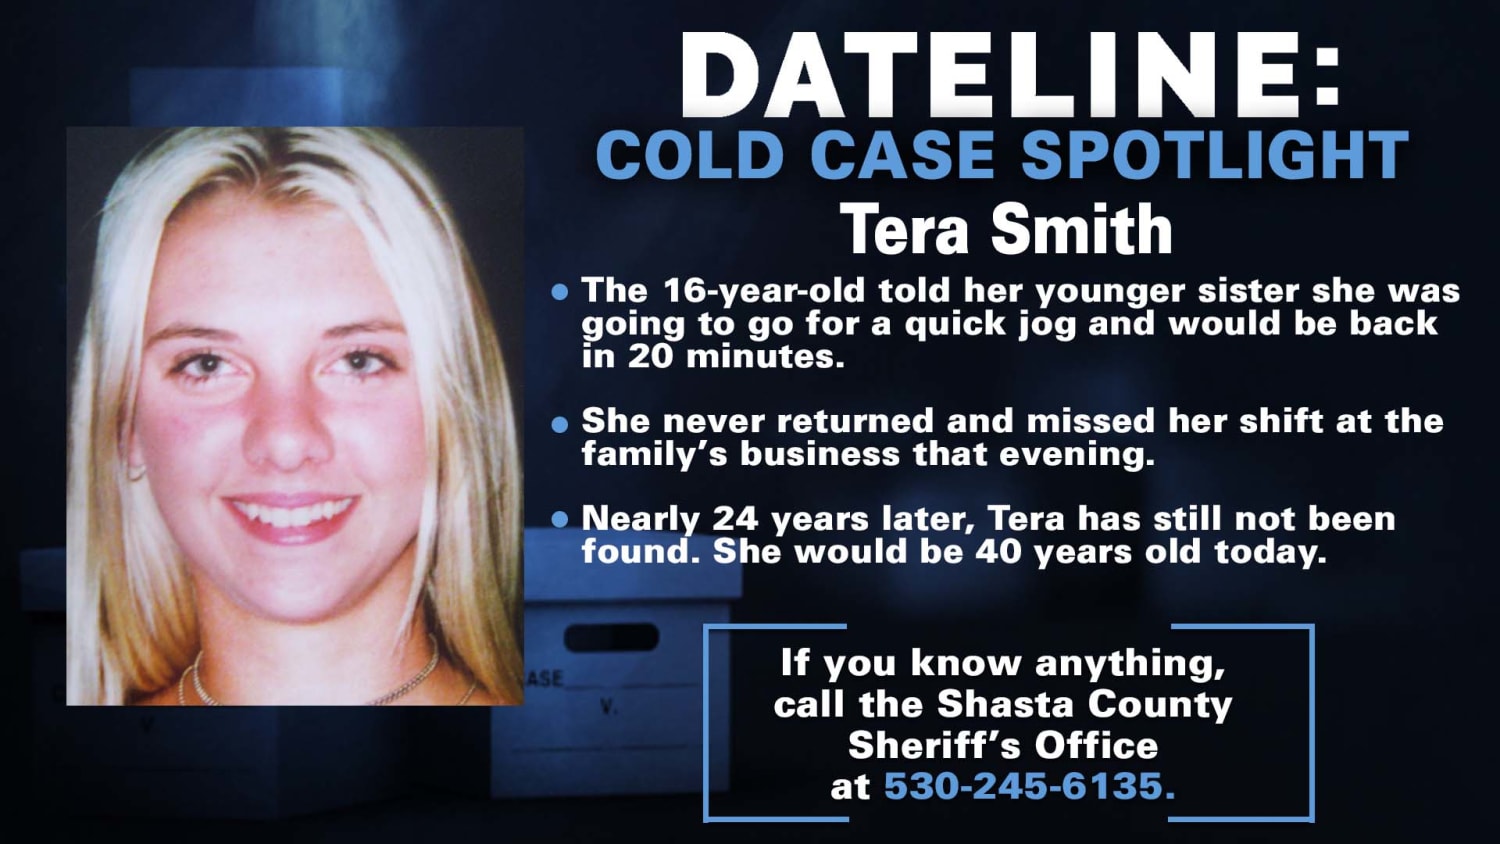 Family pushing for justice in 1998 disappearance of daughter Tera Smith in Redding, California